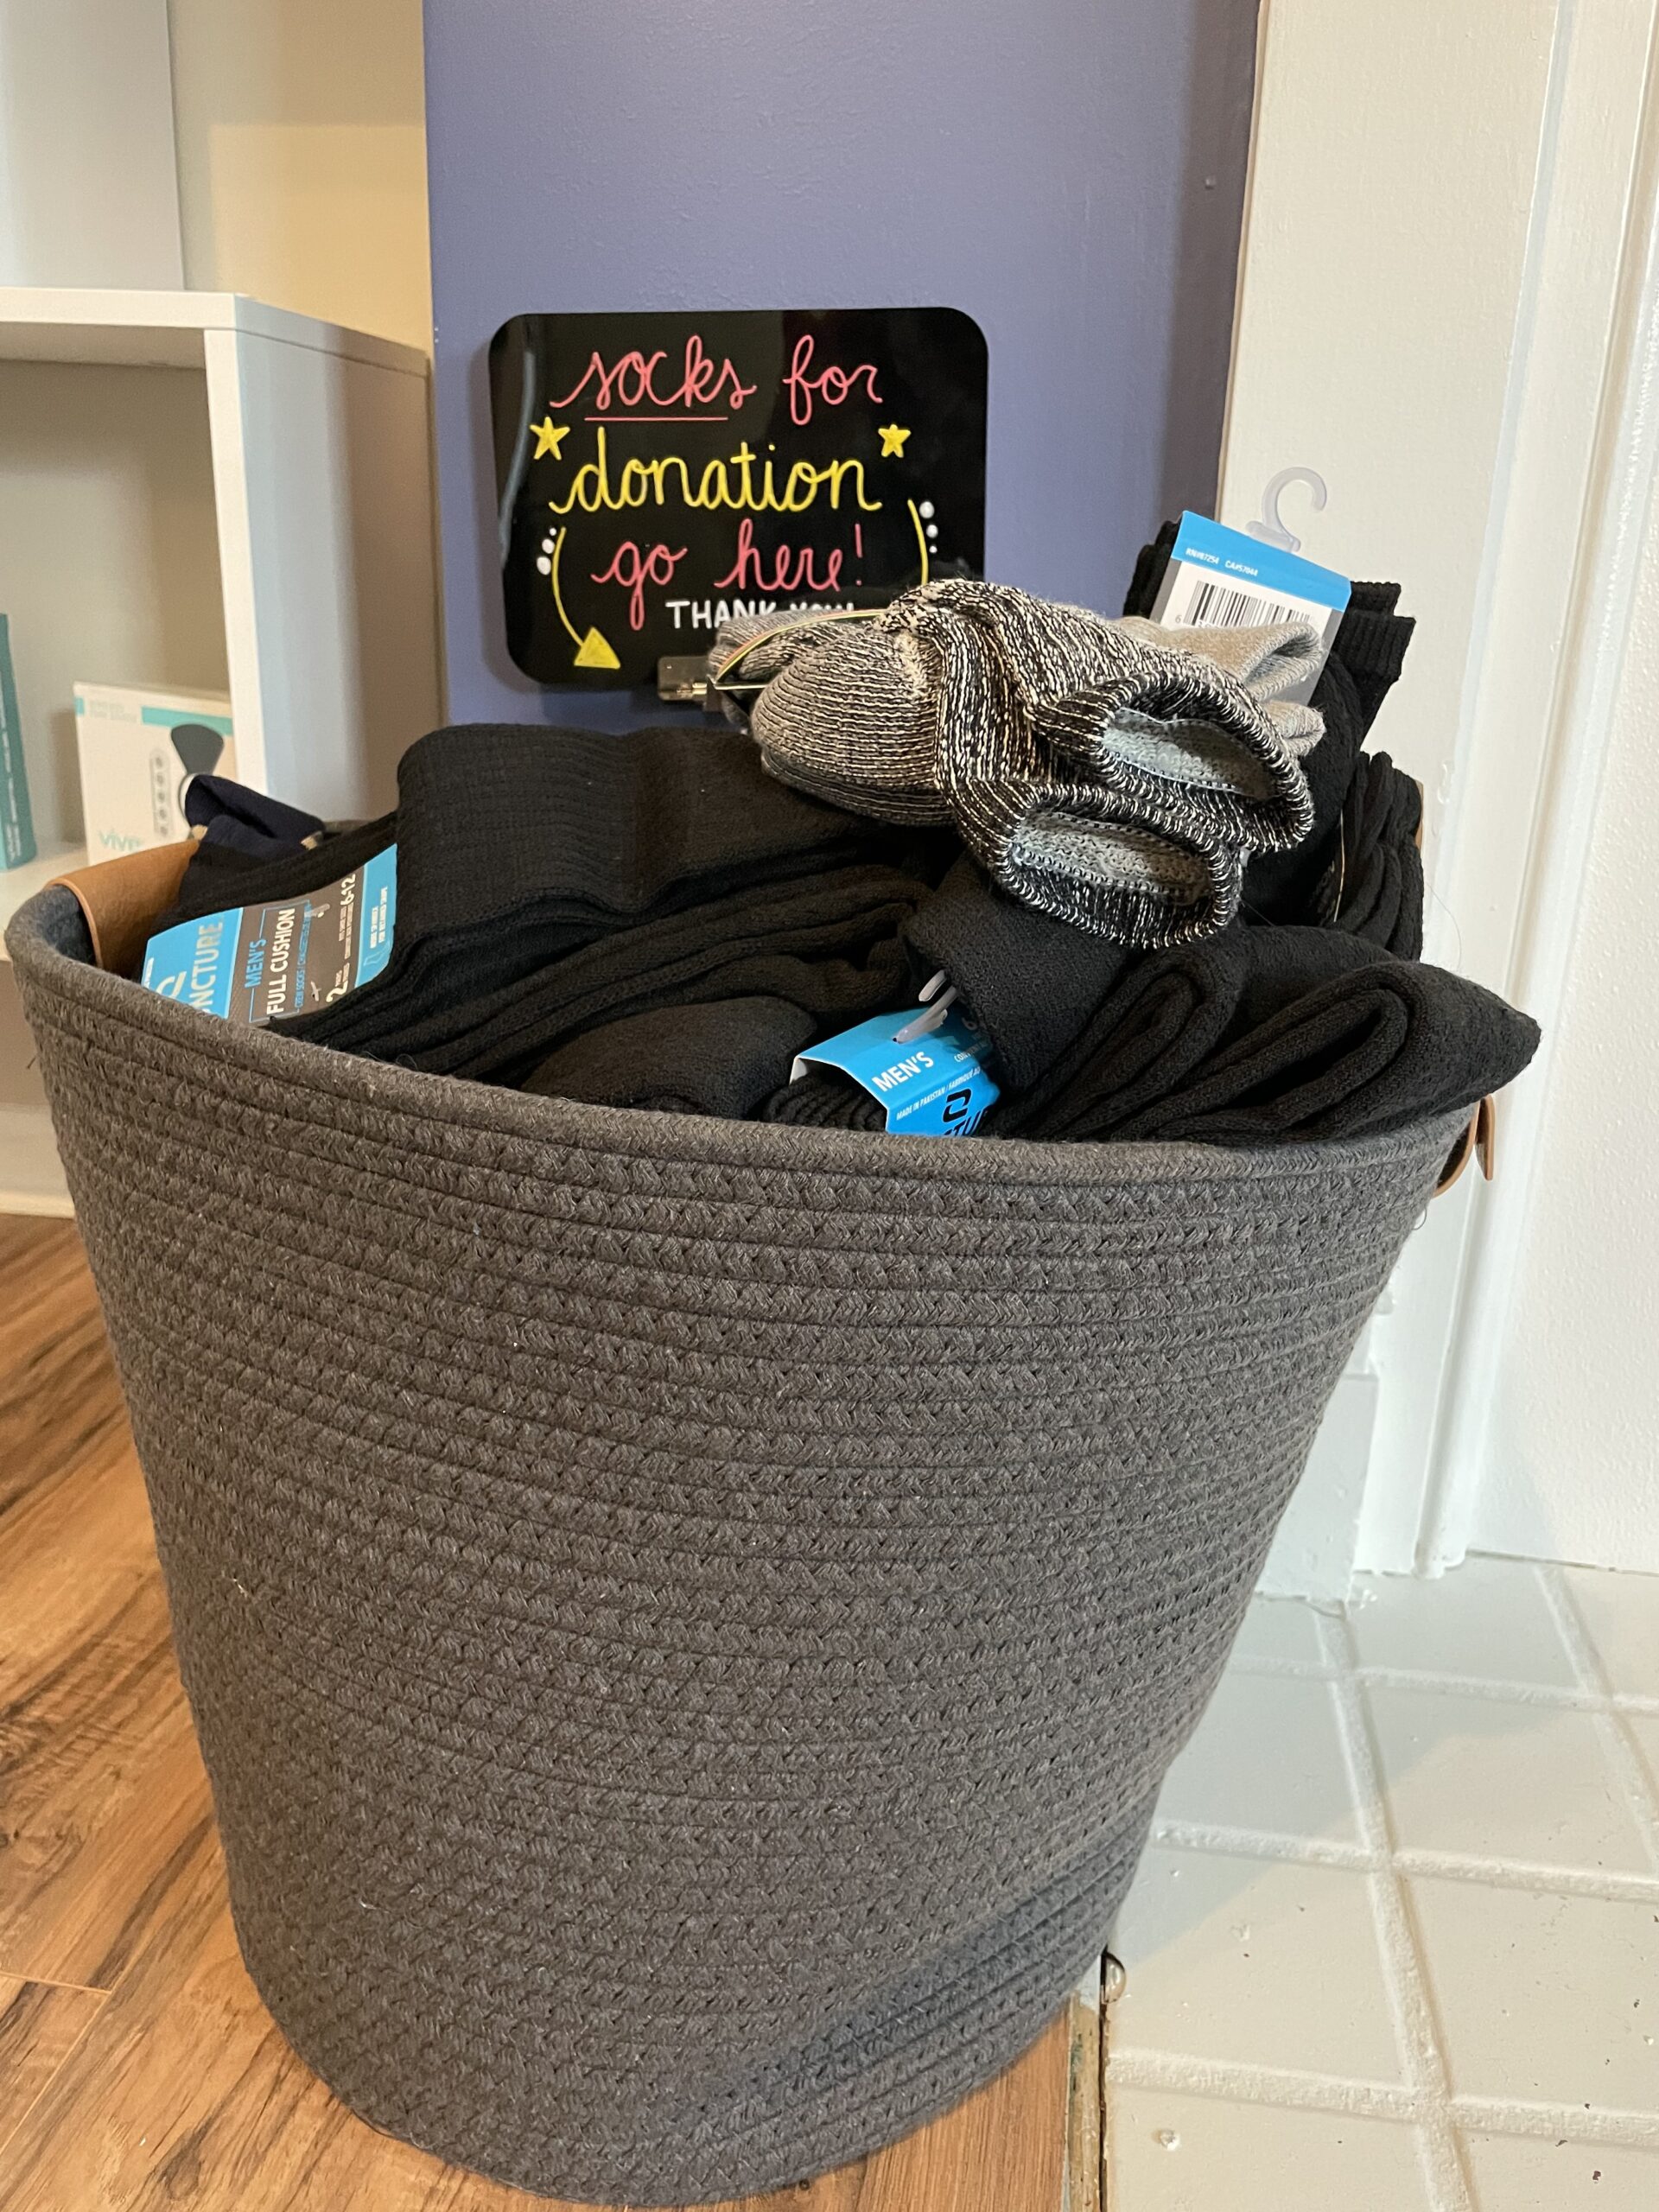 Basket With Socks Collected For The Homeless | Community OutREACH | REACH Rehab + Chiropractic